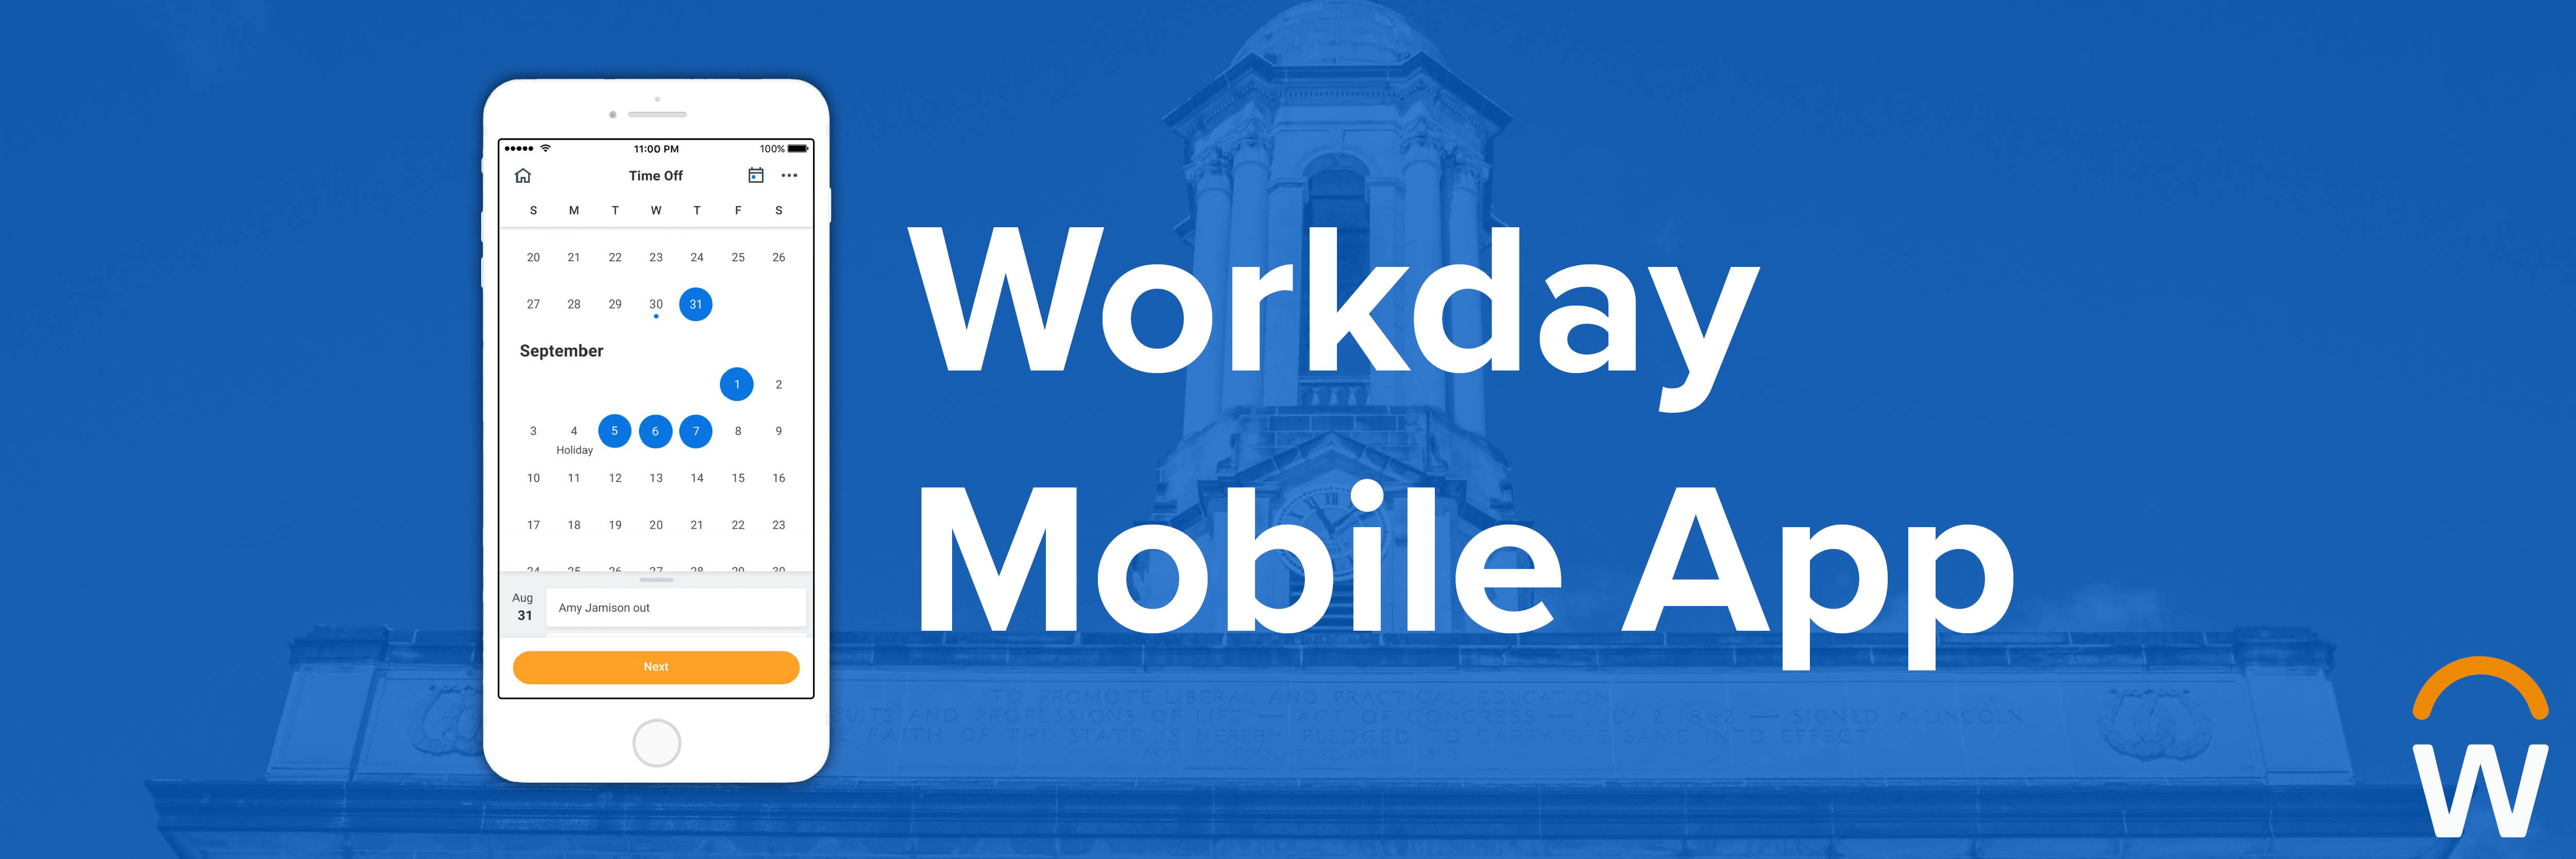 Workday Mobile App | PSU Human Resources